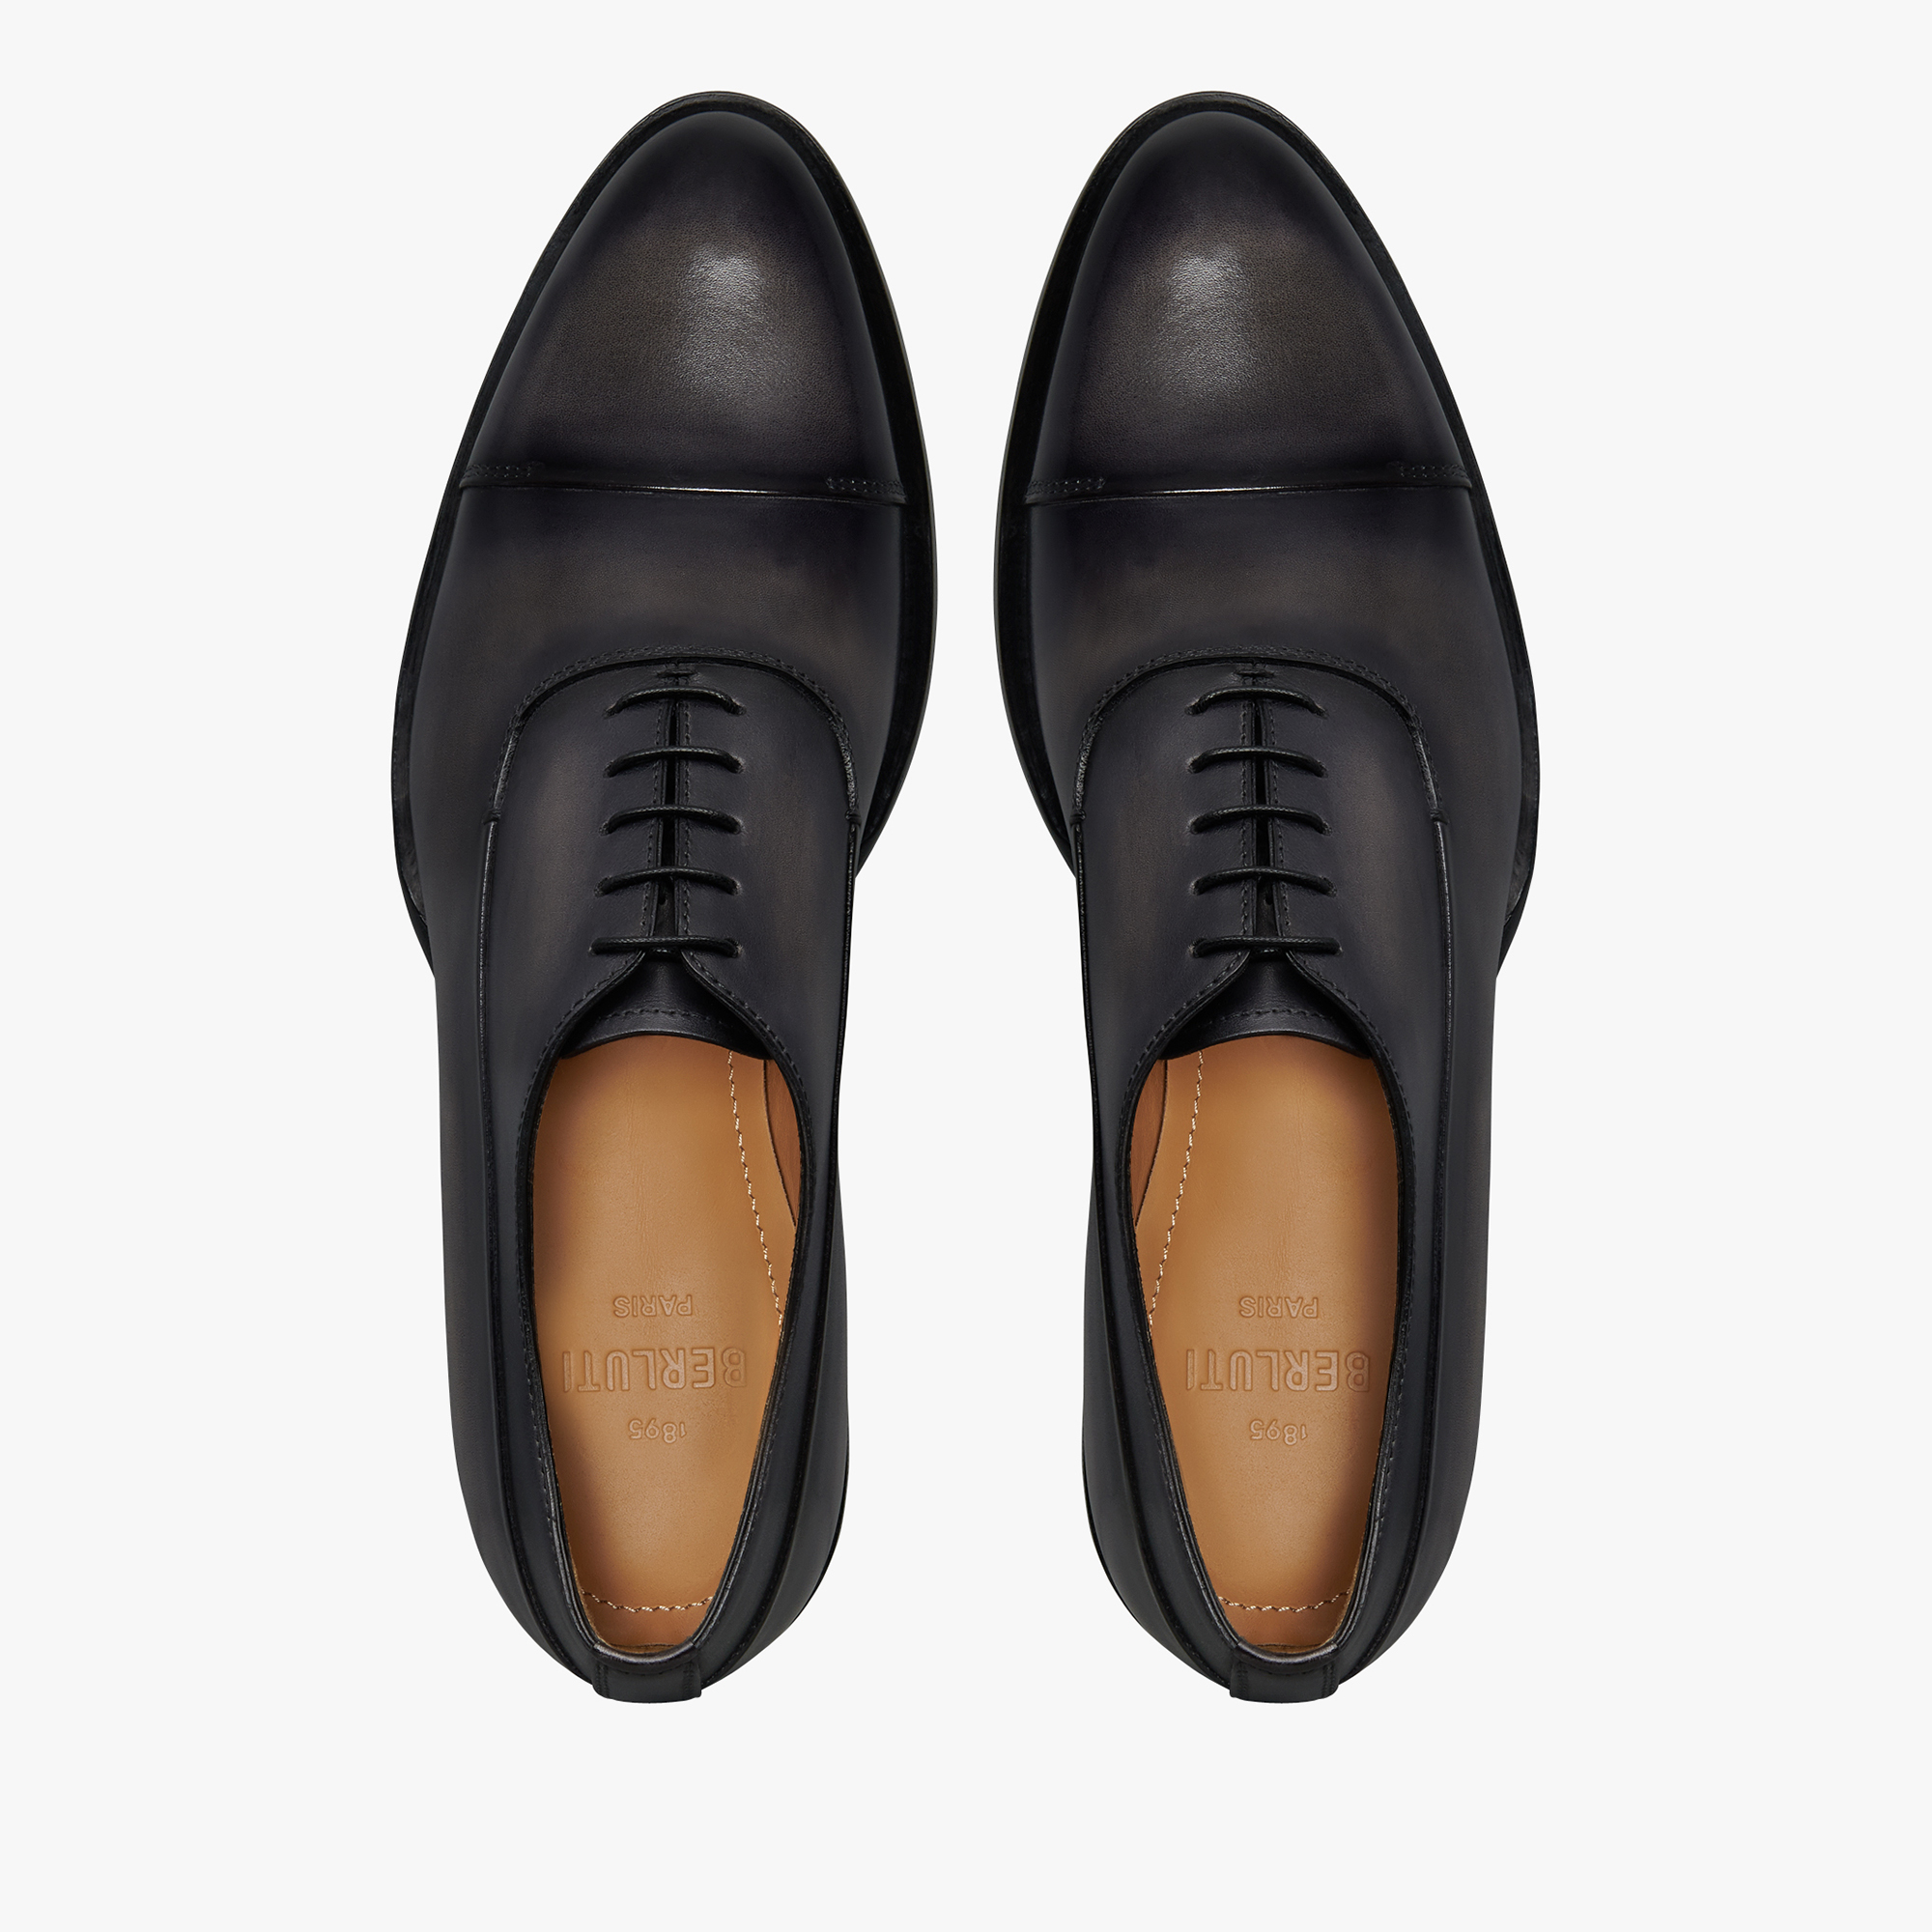 Equilibre Leather Oxford